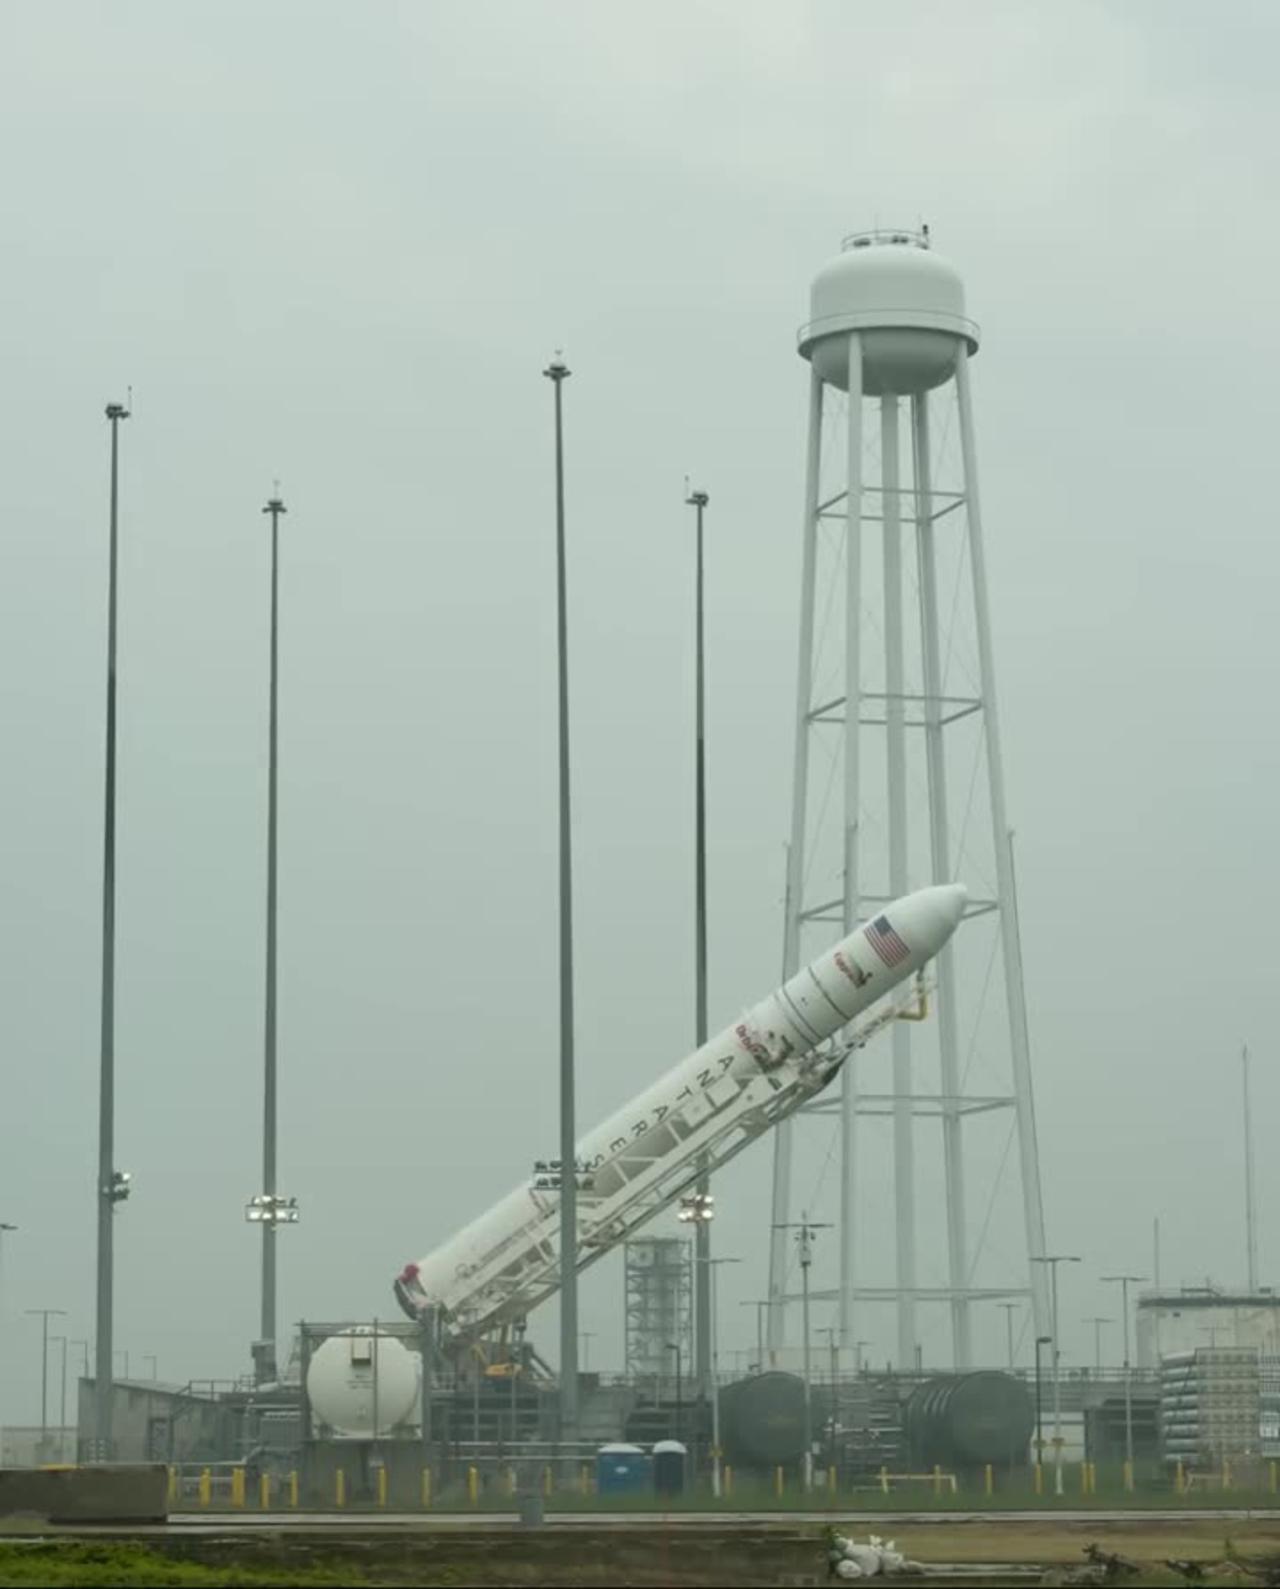 Antares Rocket Raised on Launched pad